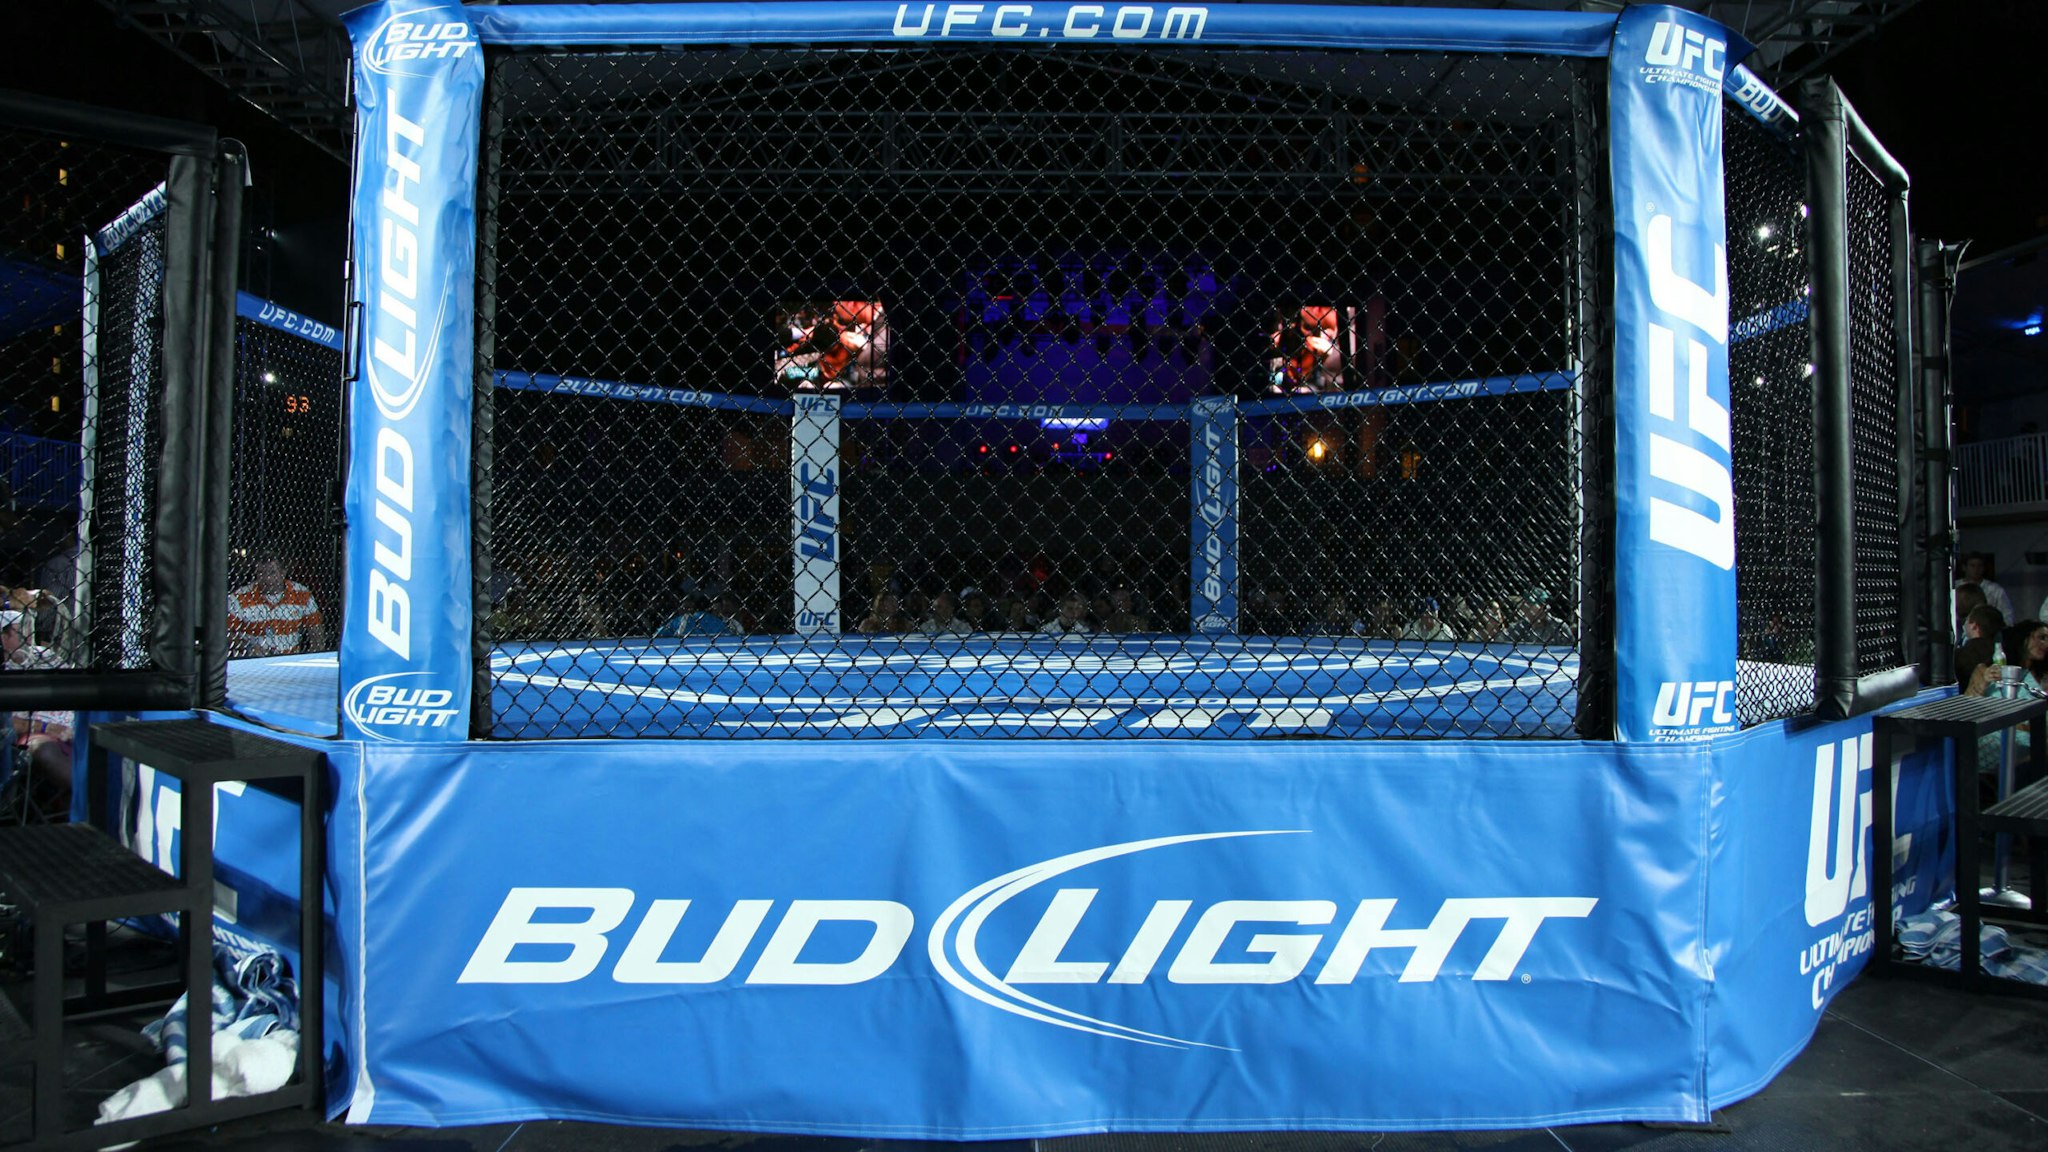 MIAMI BEACH, FL - FEBRUARY 02: A general view of atmosphere is seen at the Bud Light Hotel for the UFC Exhibition presented by Bud Light Hotel at Doubletree Surfcomber Hotel - South Beach on February 2, 2010 in Miami Beach, Florida.